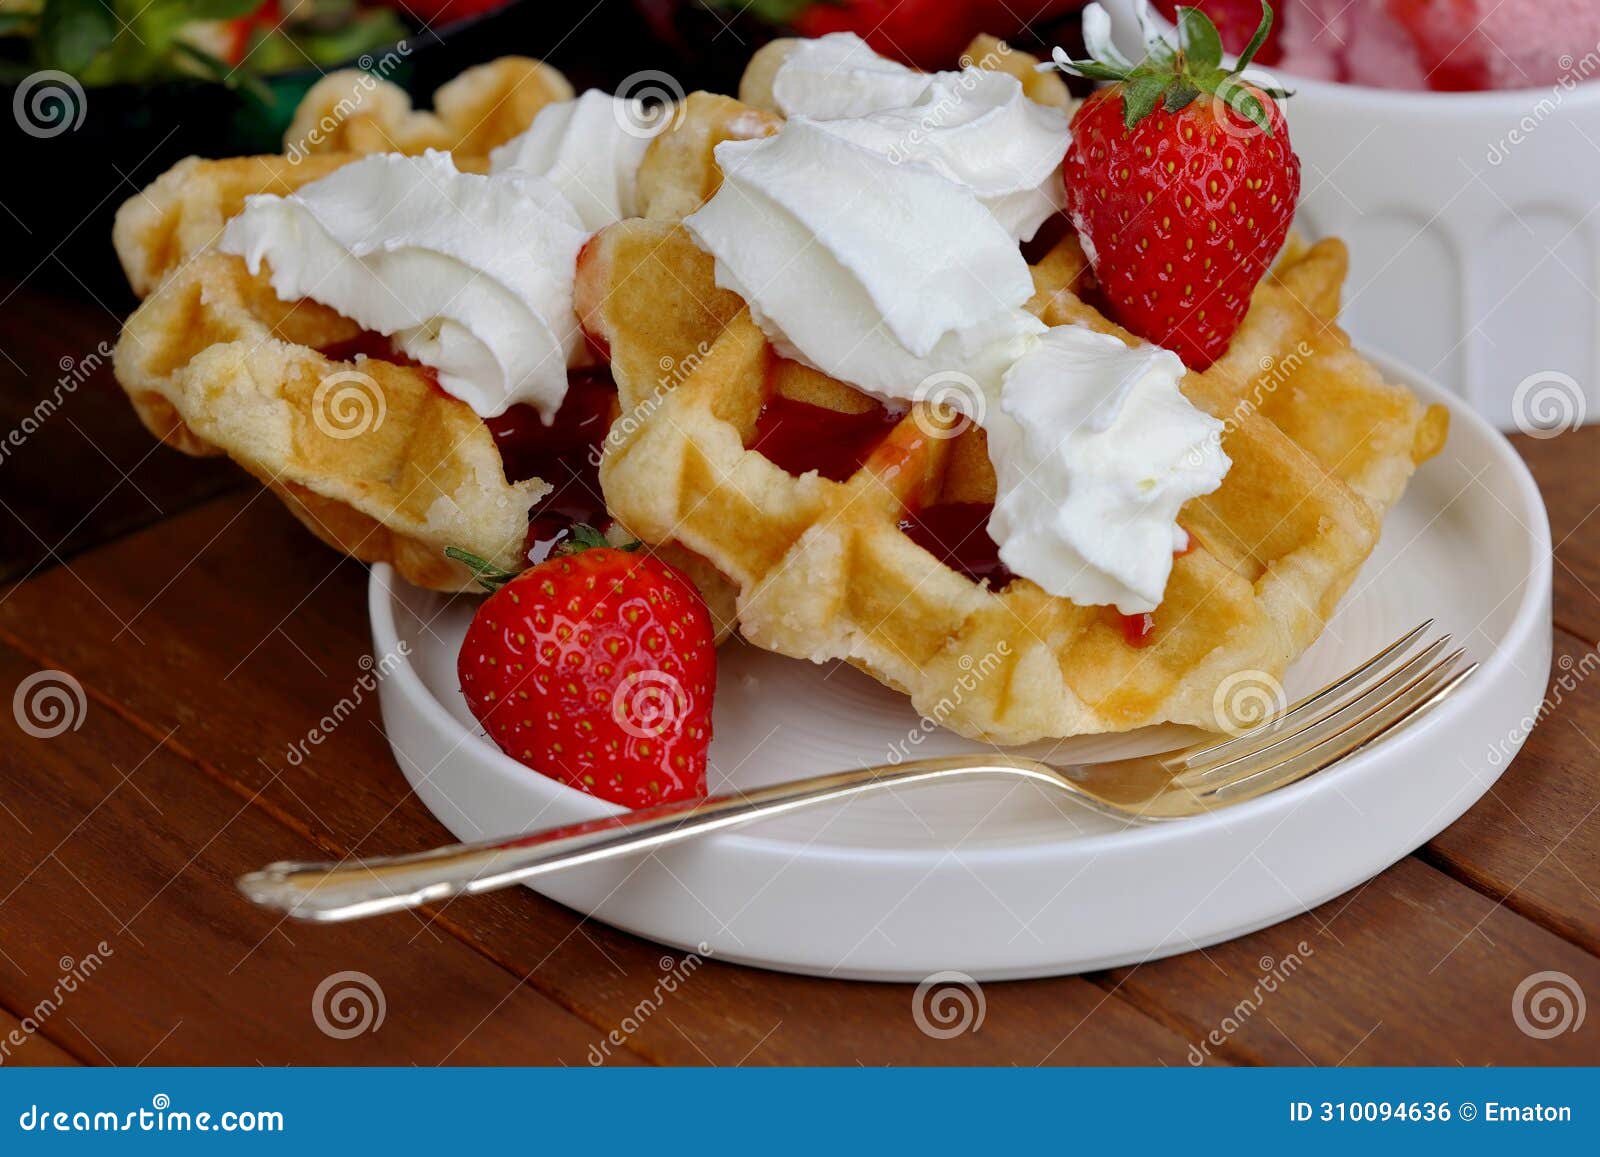 closeup of waffles with whipped cream and strawberries